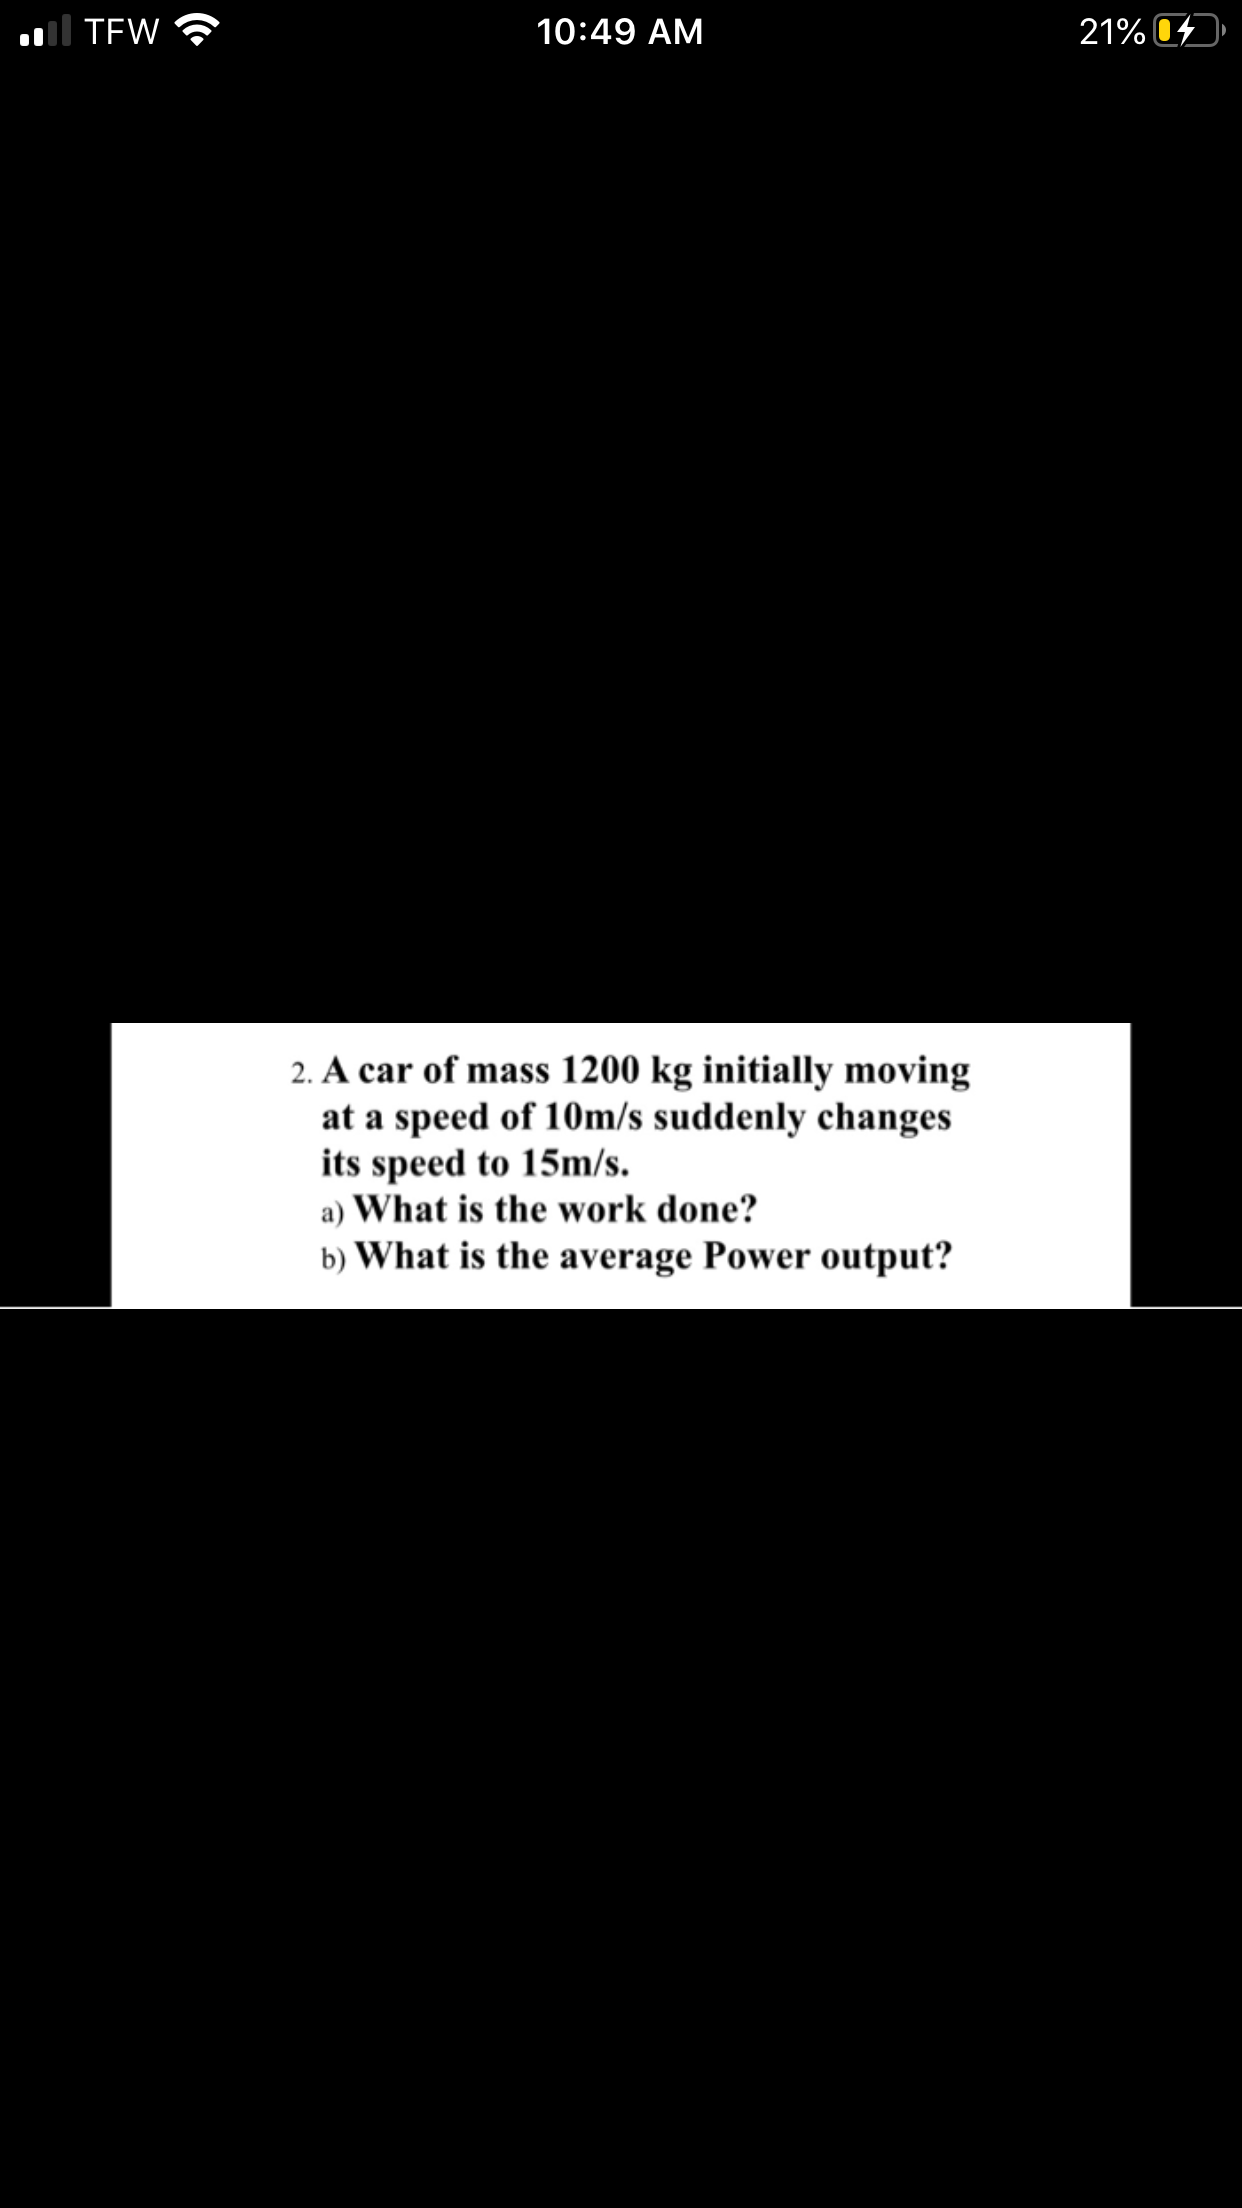 2. A car of mass 1200 kg initially moving
at a speed of 10m/s suddenly changes
its speed to 15m/s.
a) What is the work done?
b) What is the average Power output?
